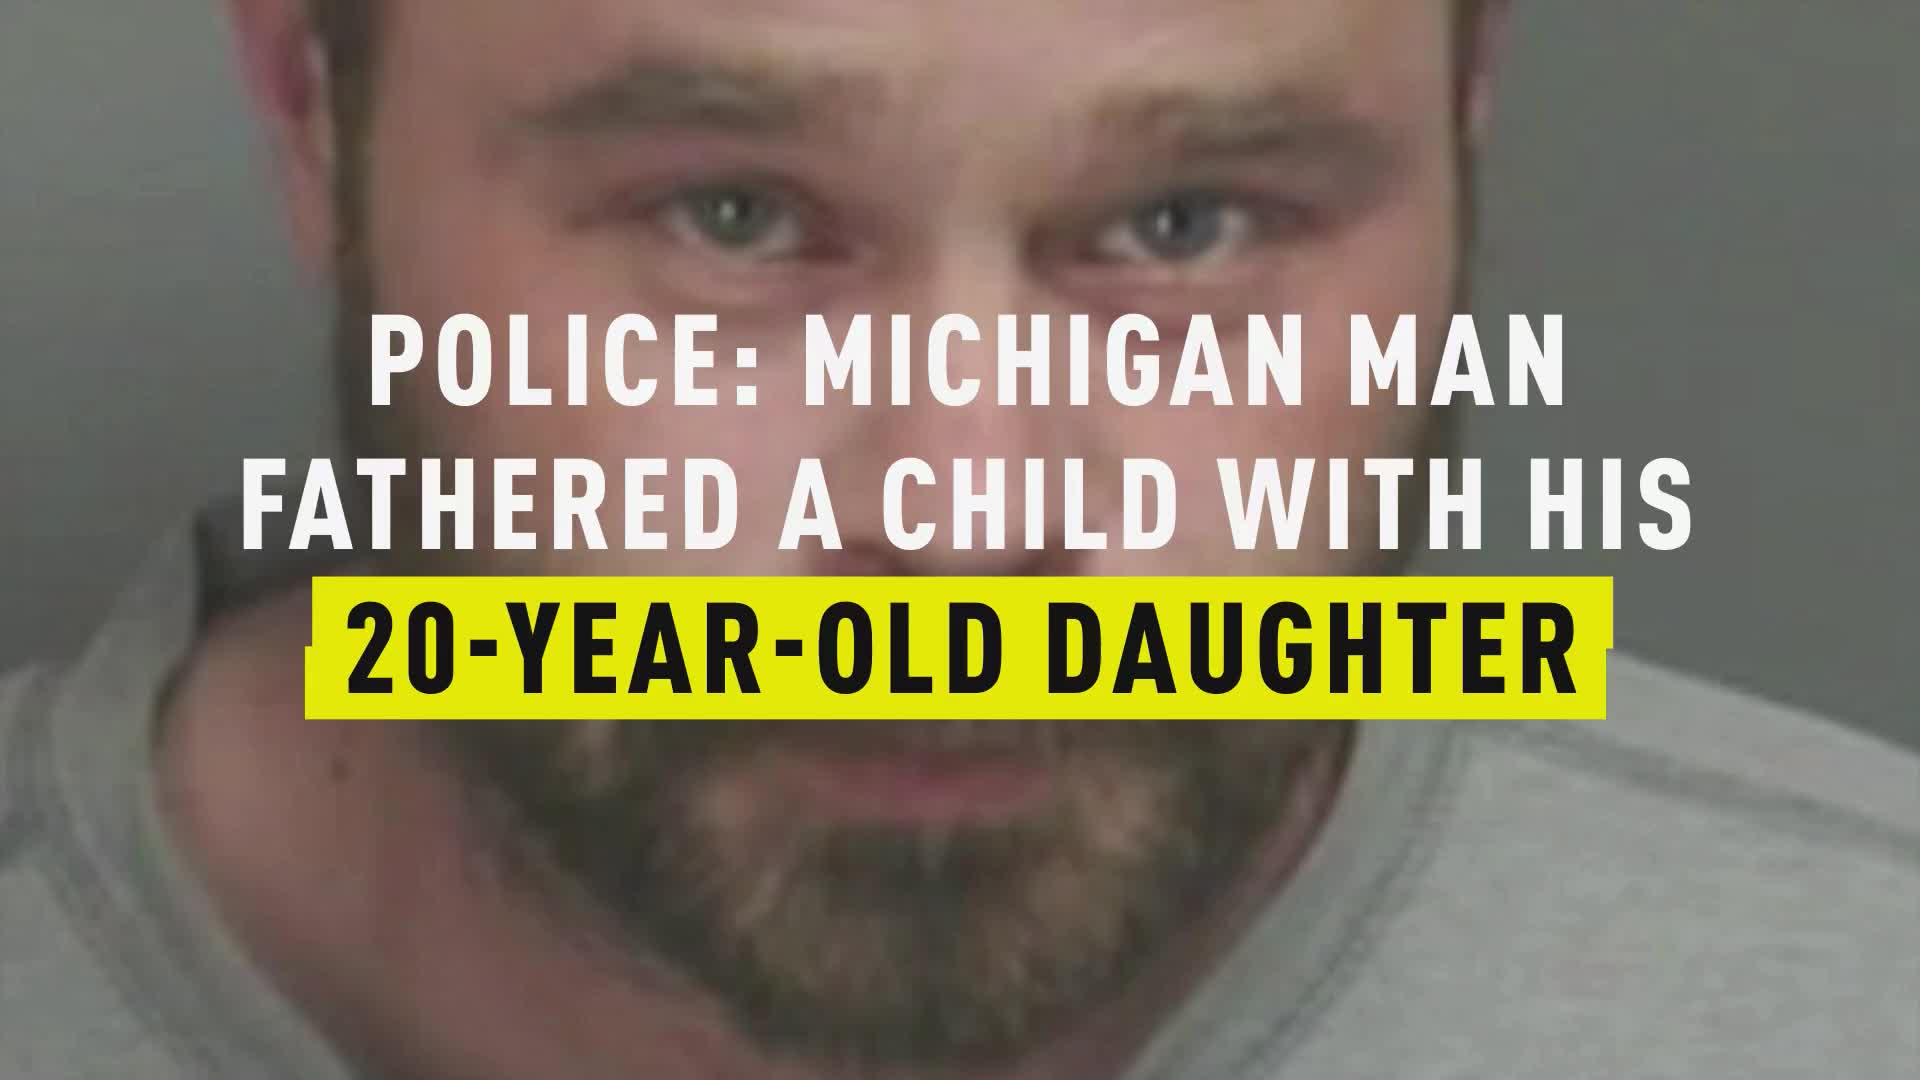 Father Fucks Daughter Incest - Police: Michigan Man Fathered A Child With His 20-Year-Old Daughter